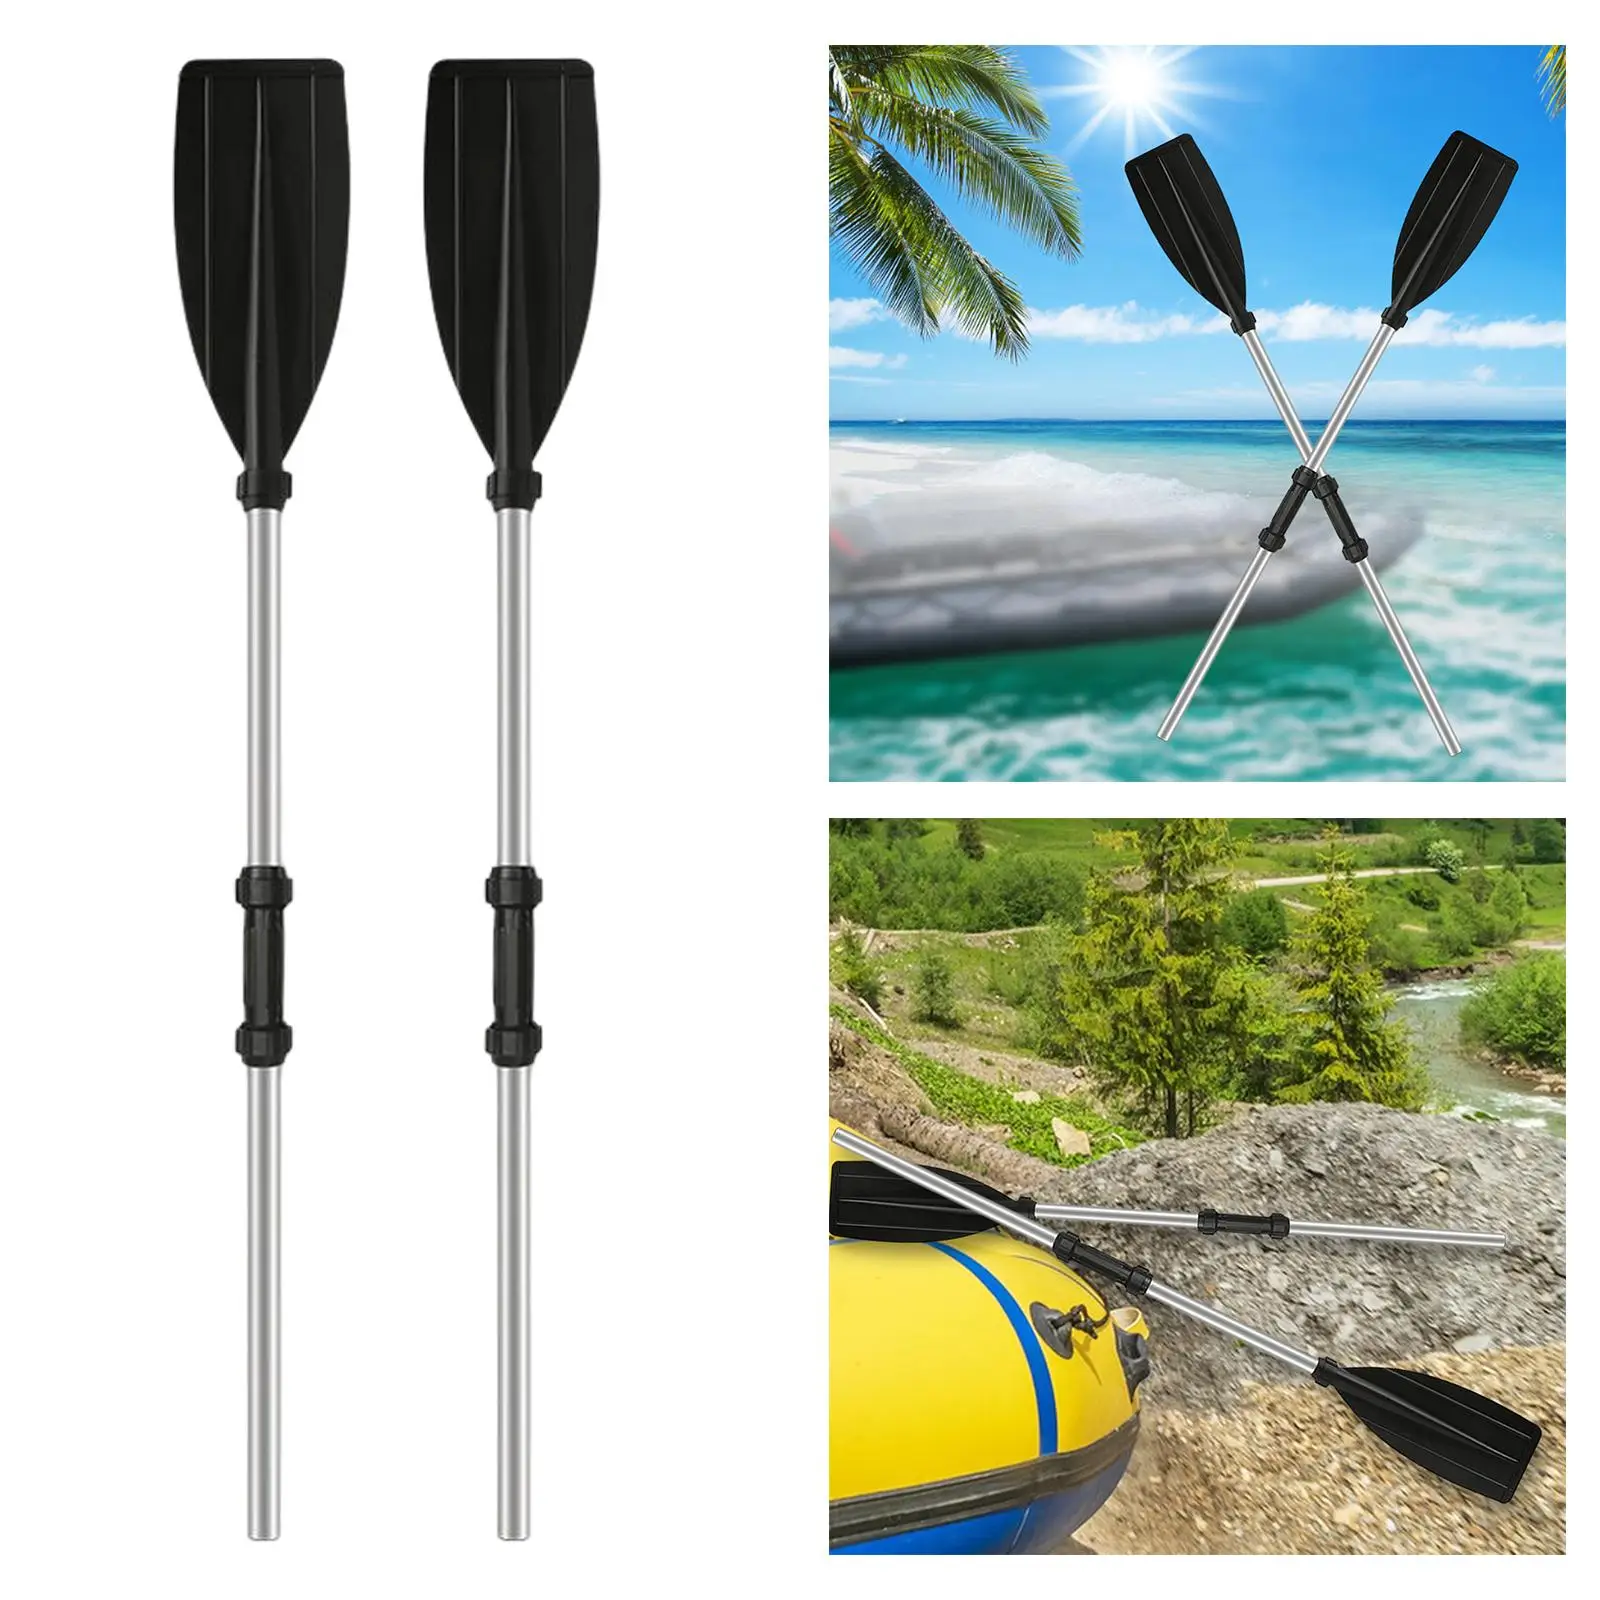 Multipurpose Kayak Boat Rafting Paddle Aluminium Alloy Detachable Stand up Paddle Board for Kayak Surfing Boating Supplies